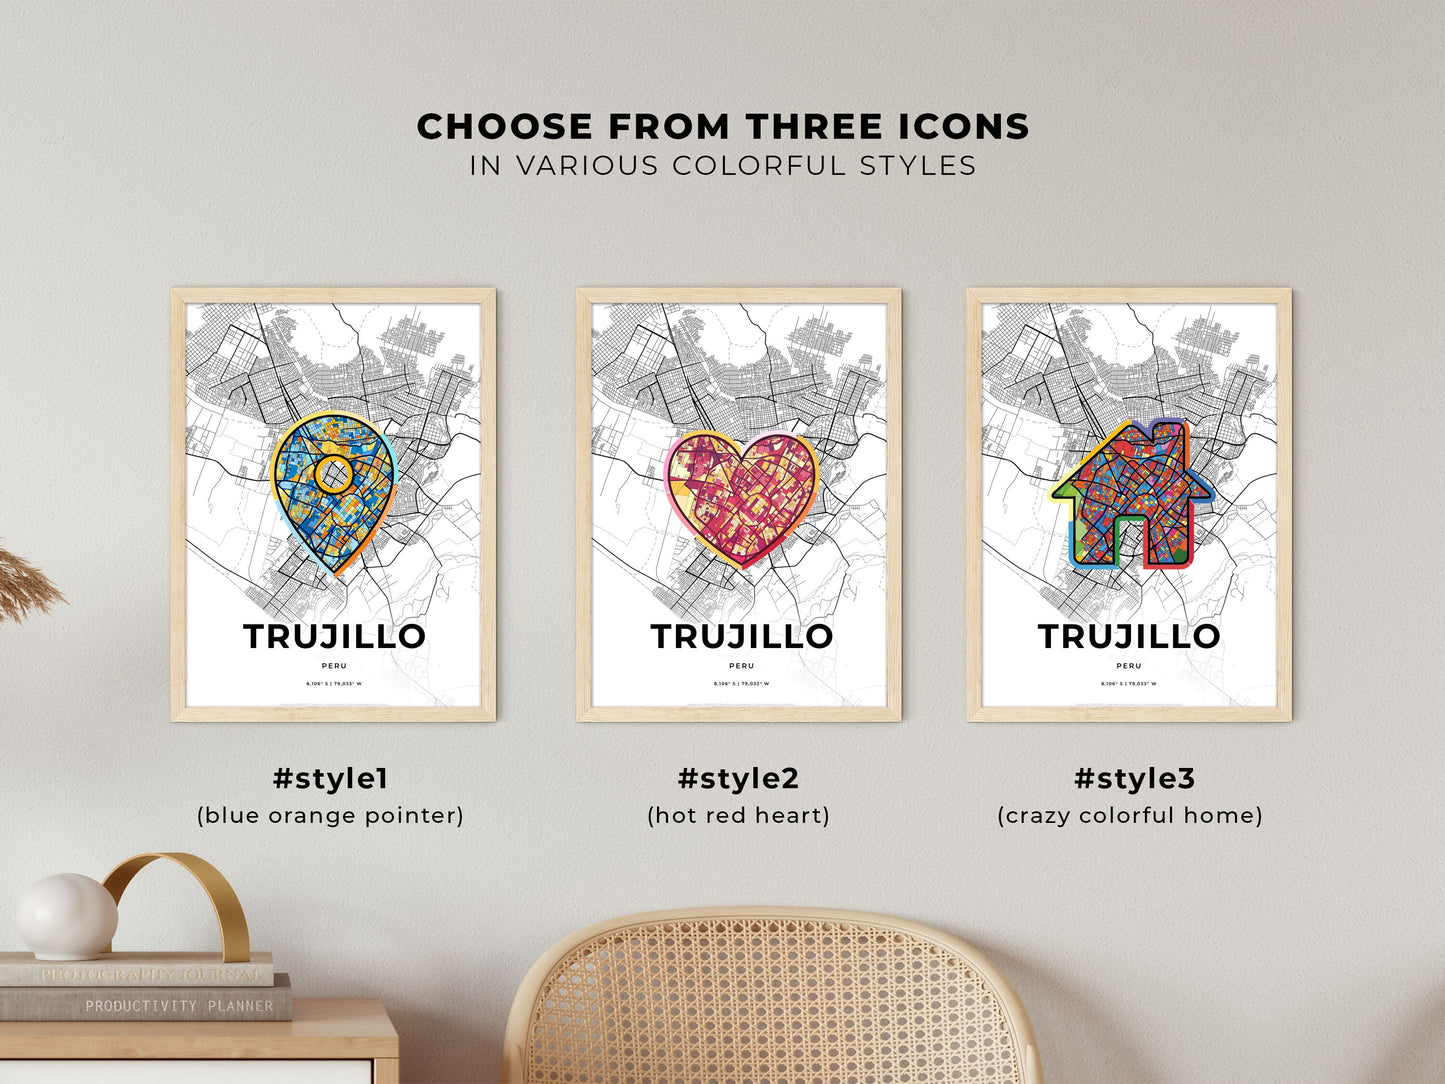 TRUJILLO PERU minimal art map with a colorful icon. Where it all began, Couple map gift.